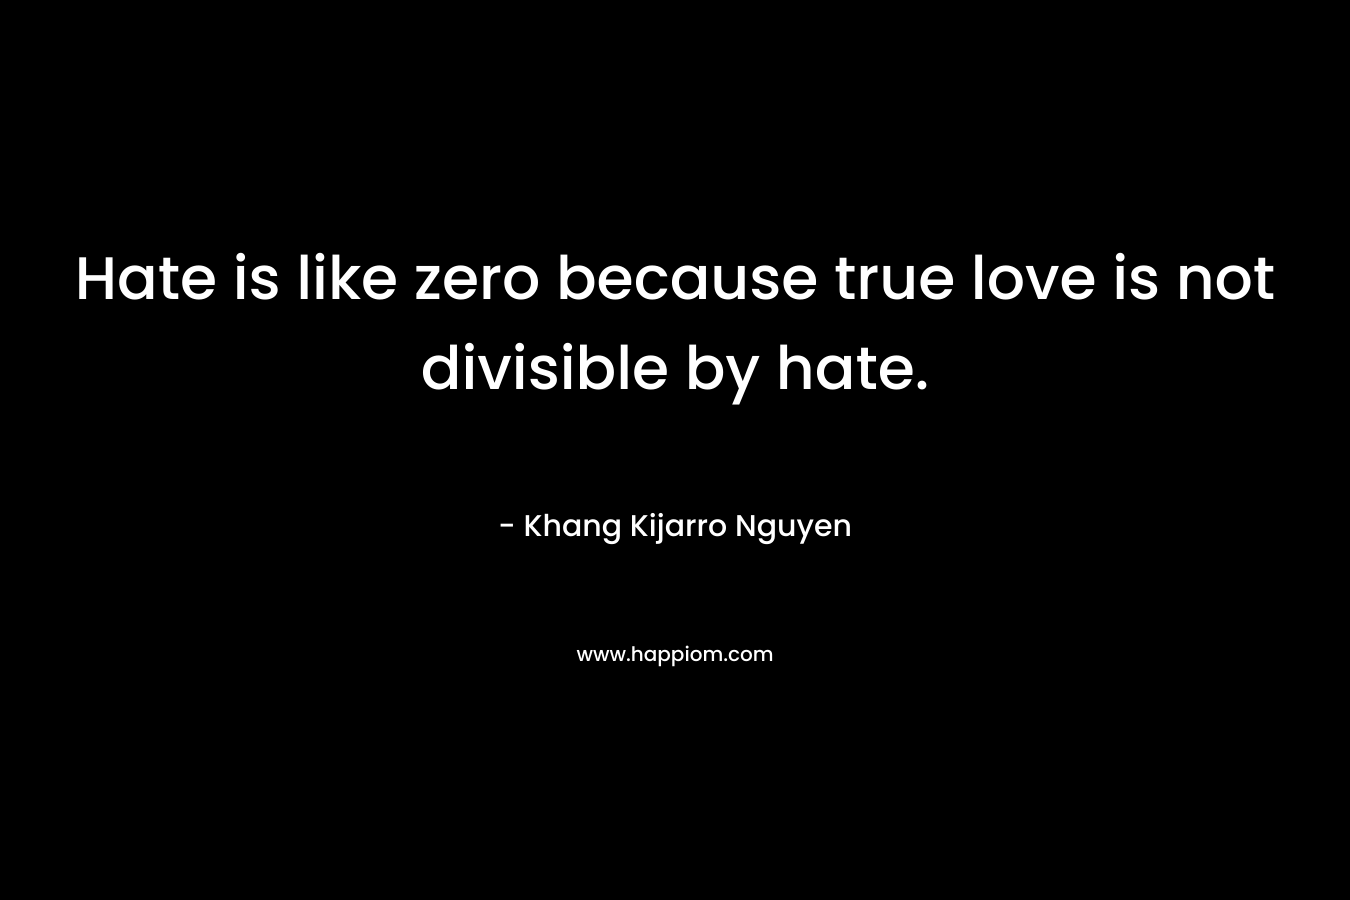 Hate is like zero because true love is not divisible by hate.